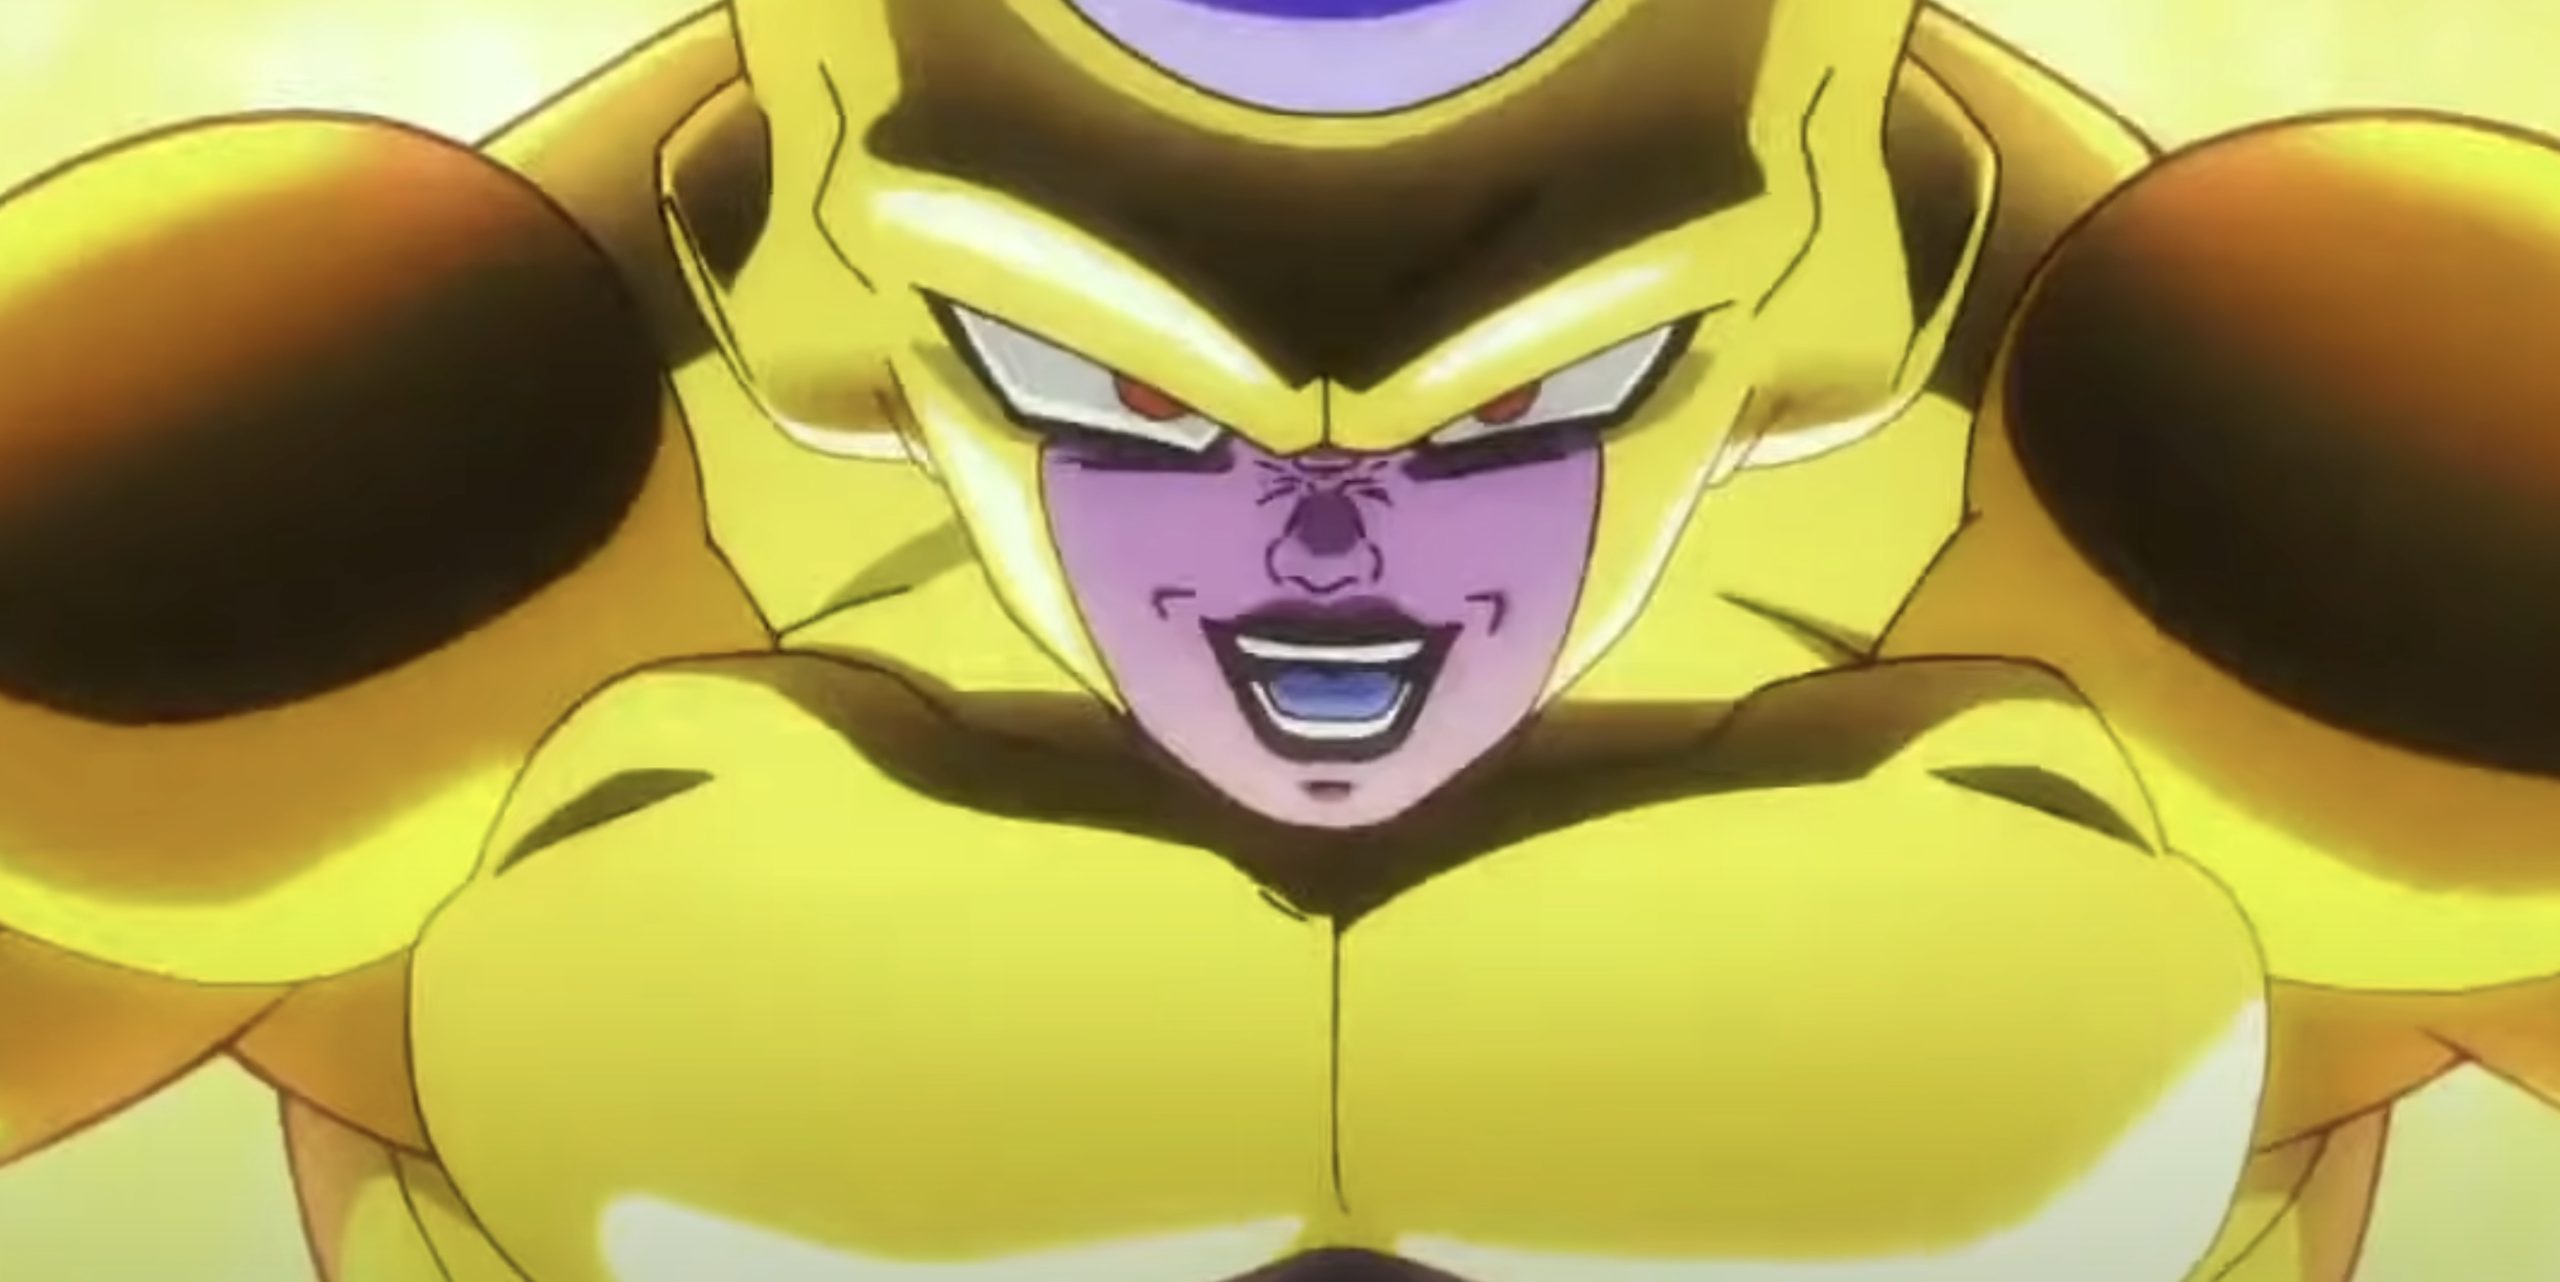 1707163016 975 The Real Reason Why Black Frieza Is The Strongest Character